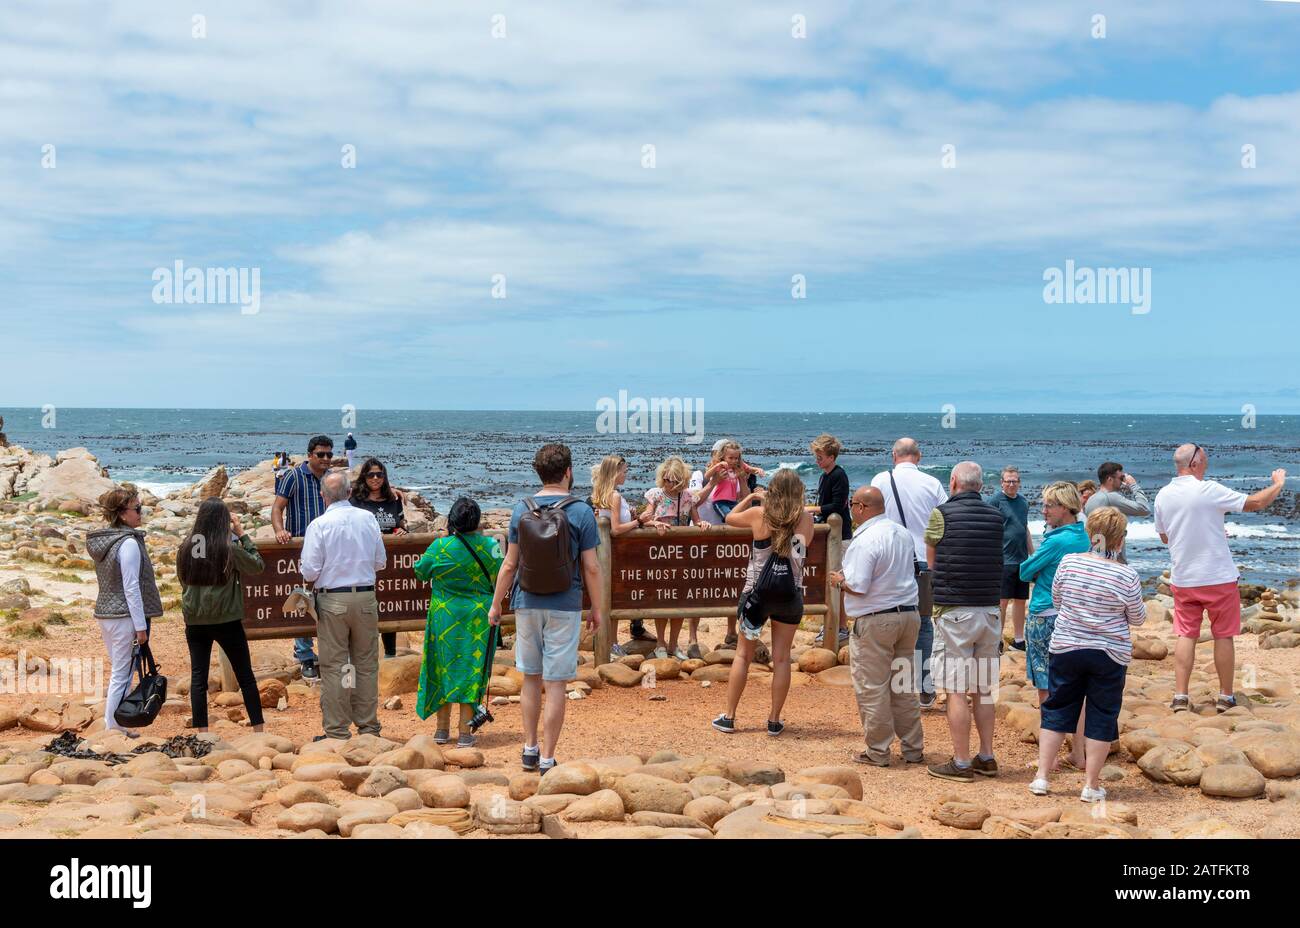 Crowd of visitors stand around the Cape of Good Hope sign in the Cape Point National Park, South Africa Stock Photo